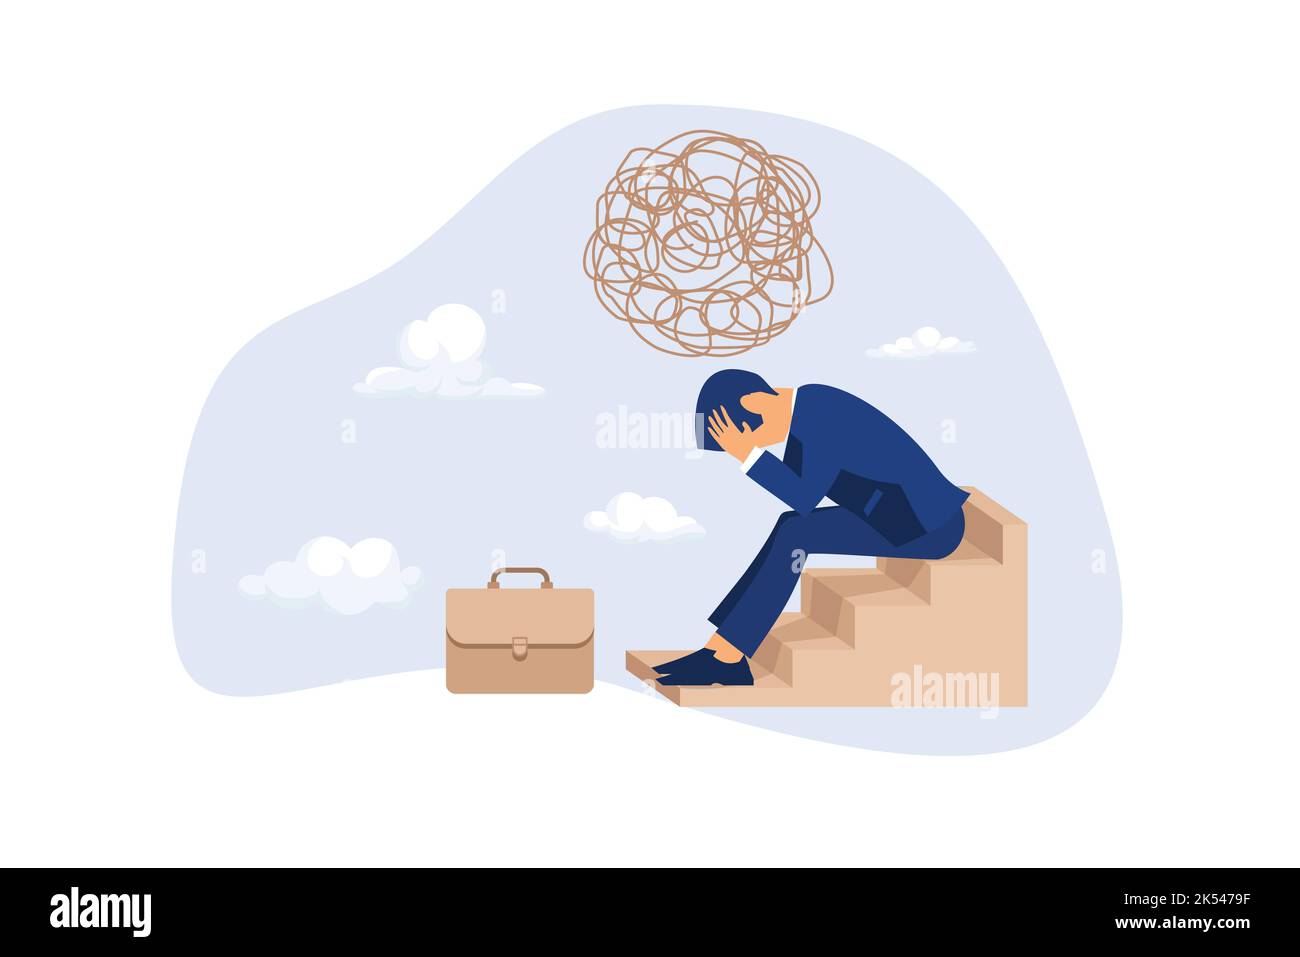 Stress at work, exhausted from overworked and too many problems or frustrated and paranoia office worker concept, hopelessness frustrated businessman Stock Vector